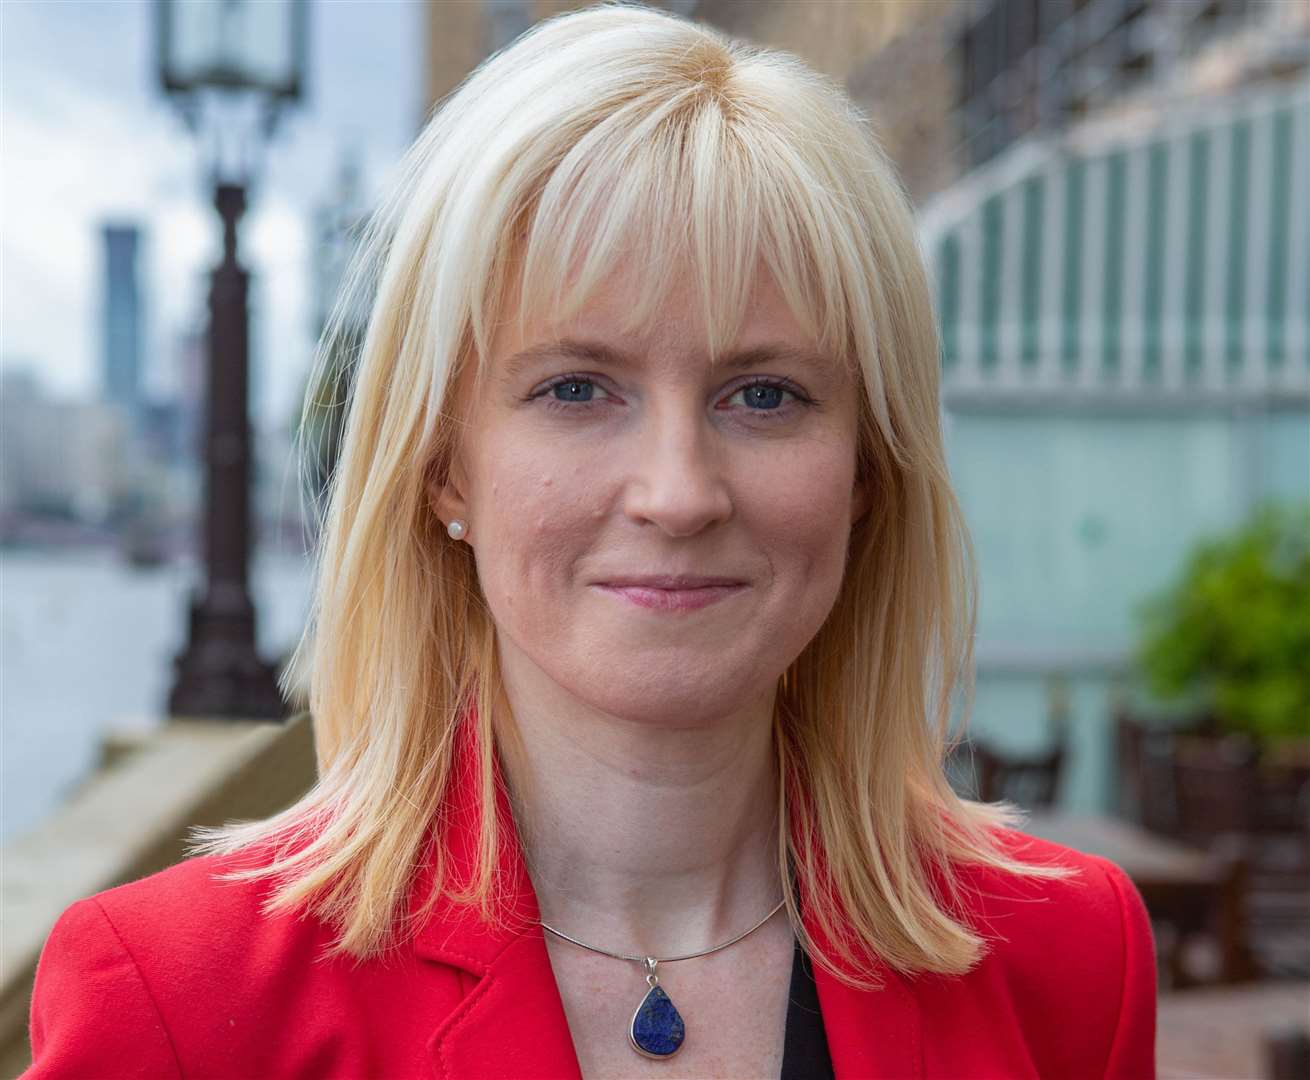 Canterbury MP Rosie Duffield says she will raise her concerns about the appointment with Kent Police